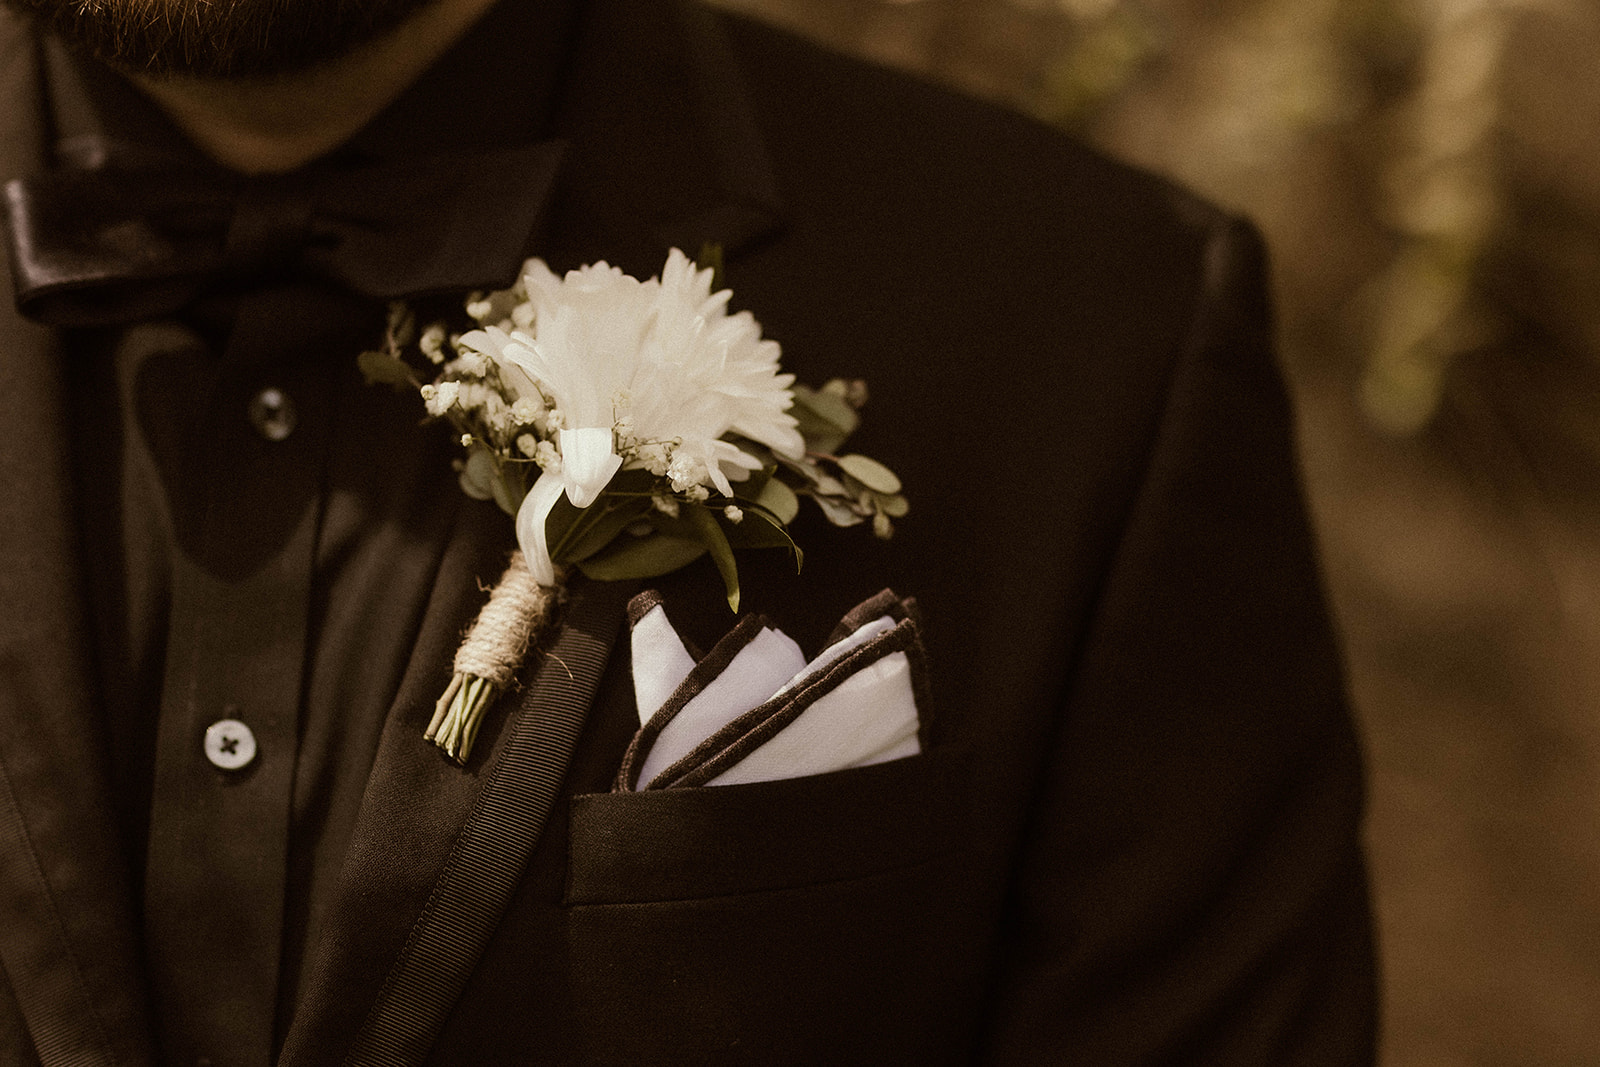 Detail shot of the grooms boutonniere for his wedding day